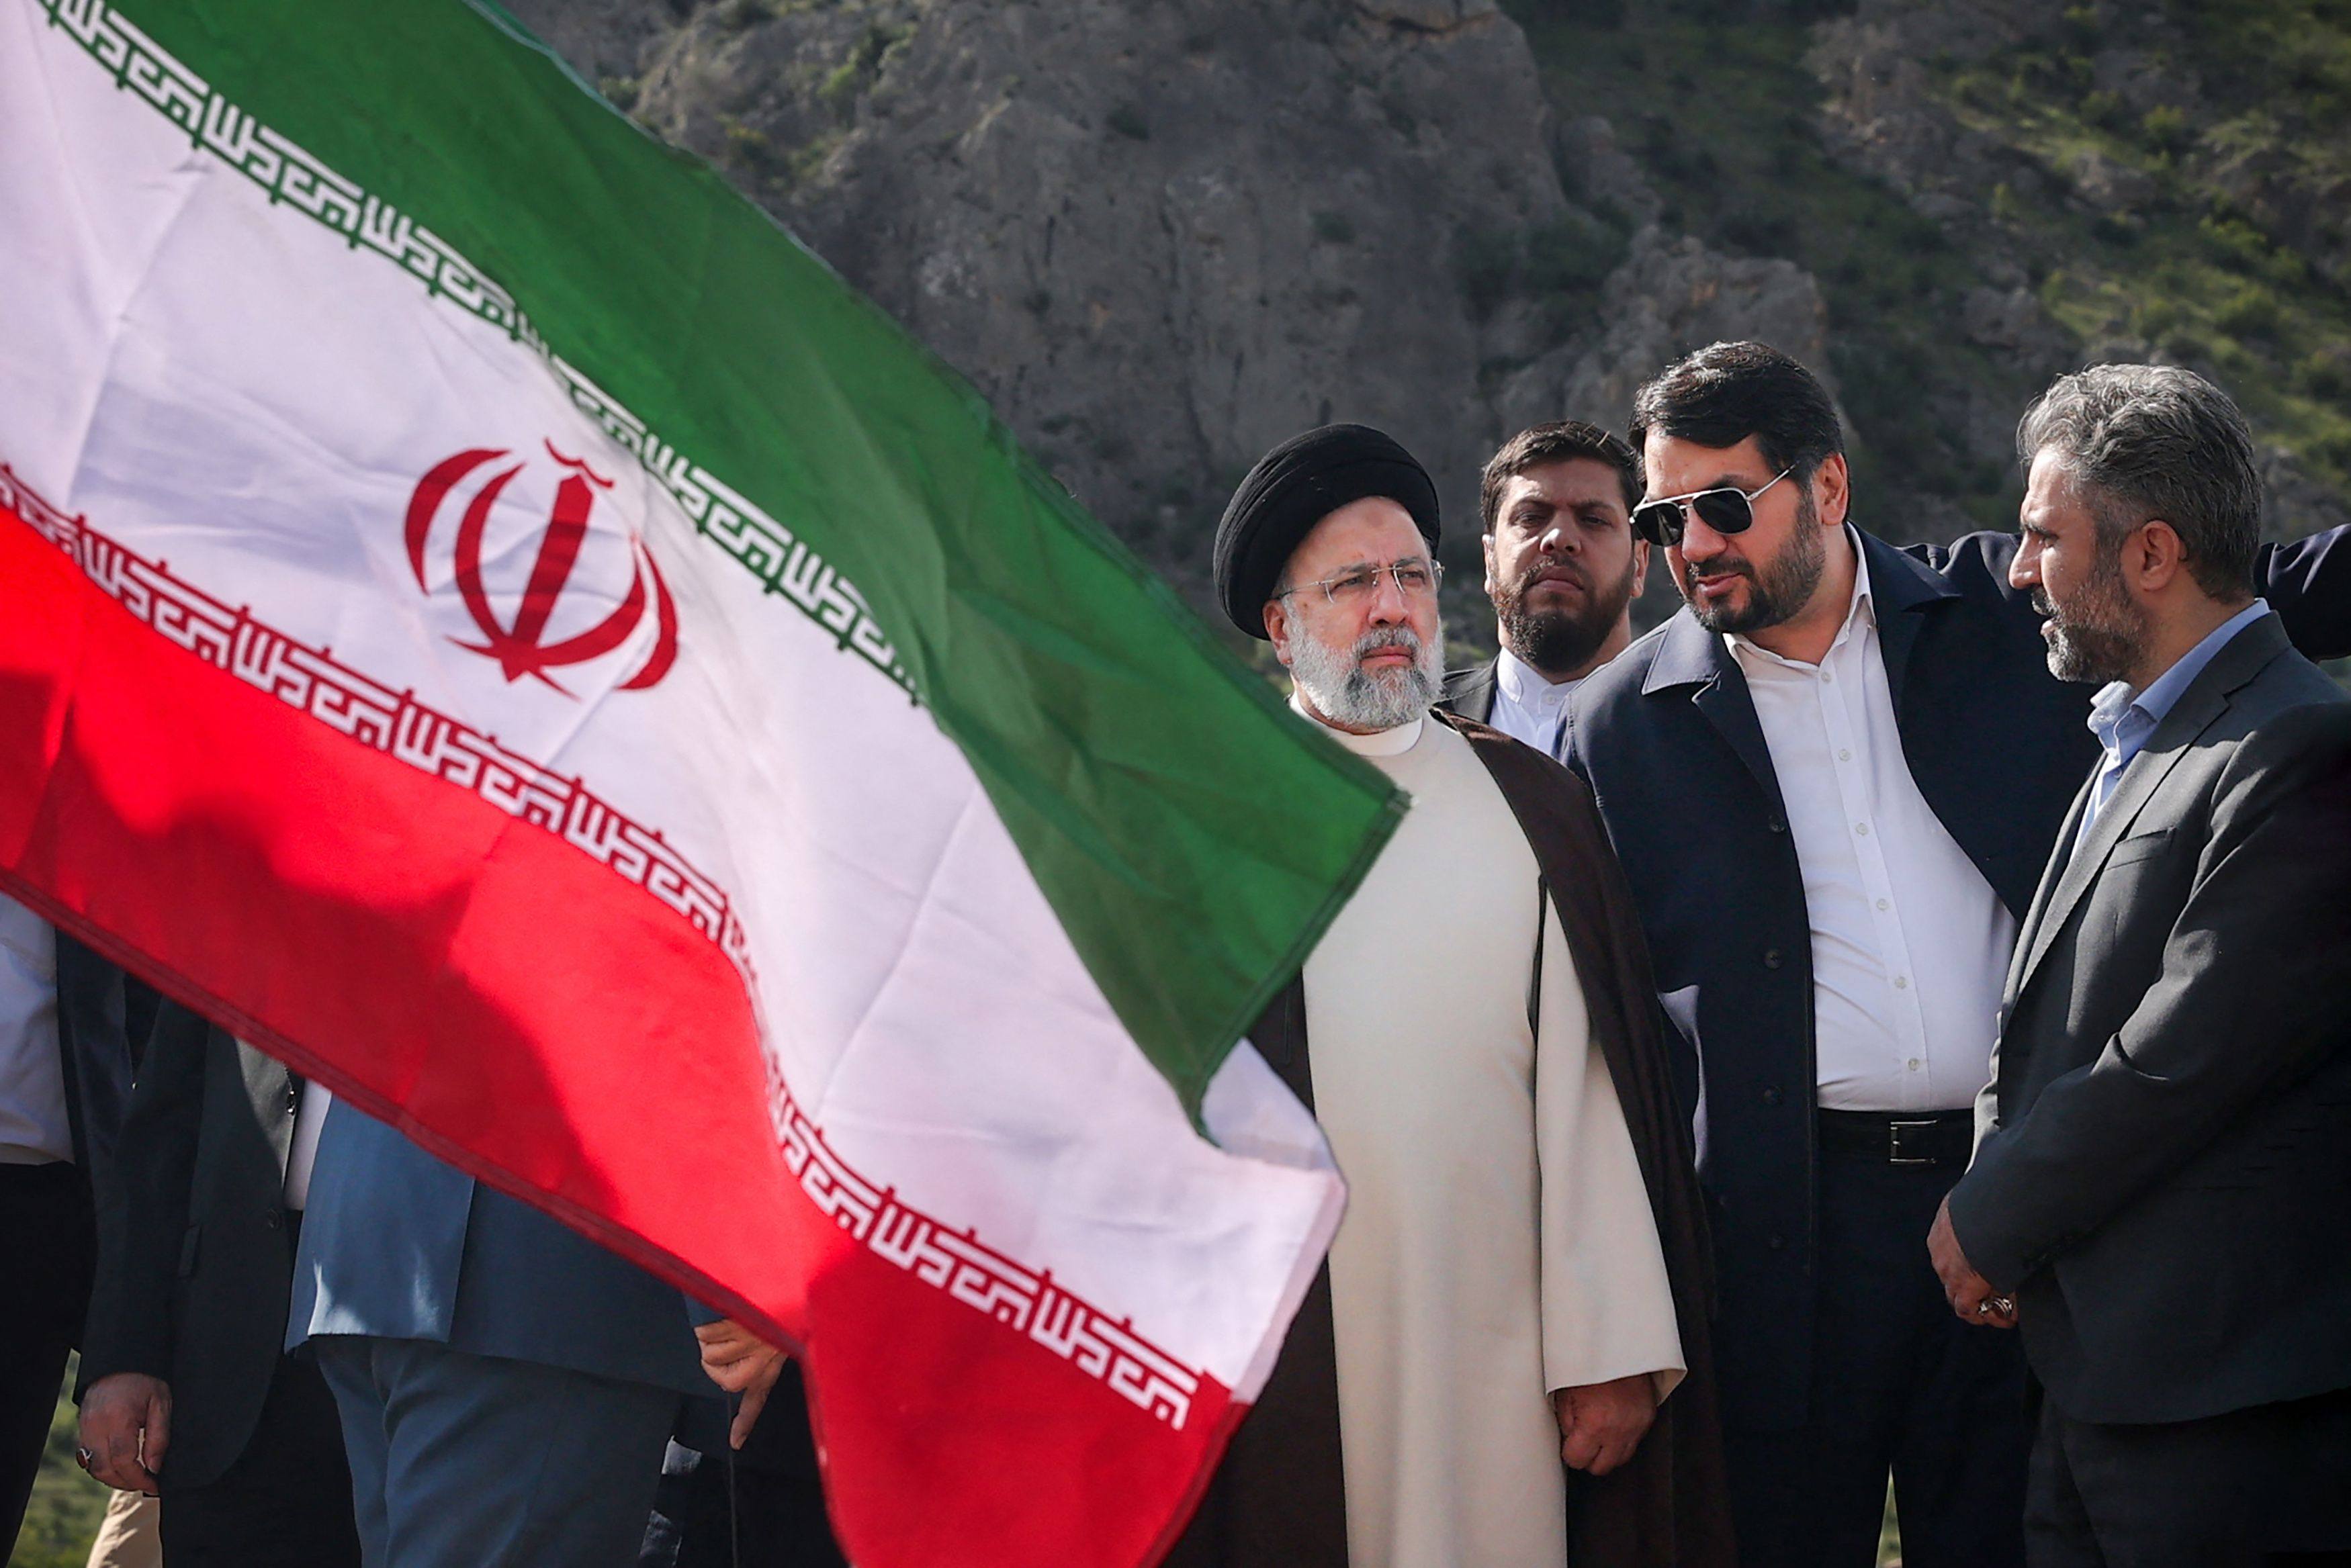 Iran’s President Ebrahim Raisi, left, at the site of Qiz Qalasi on the border of Iran and Azerbaijan on Sunday. Raisi’s helicopter was involved in “probable” accident later on Sunday. Photo: Iranian Presidency / AFP